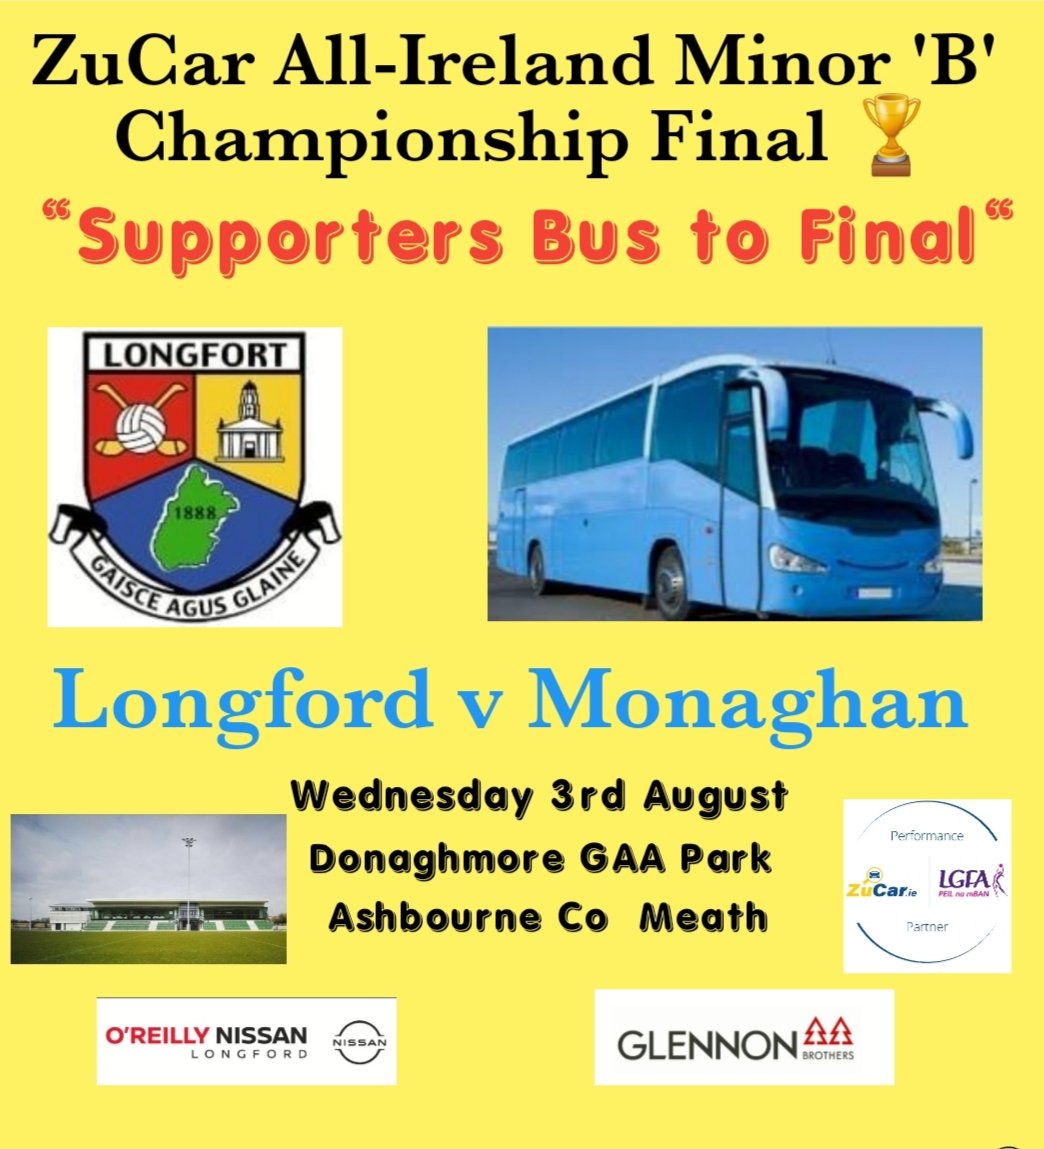 @LongfordLgfa hope to run a Supporters Bus to the ZuCar All-Ireland minor 'B' championship final in Donaghmore GAA Park on Wednesday next 3rd August If interested email secretary.longford@lgfa.ie for more information